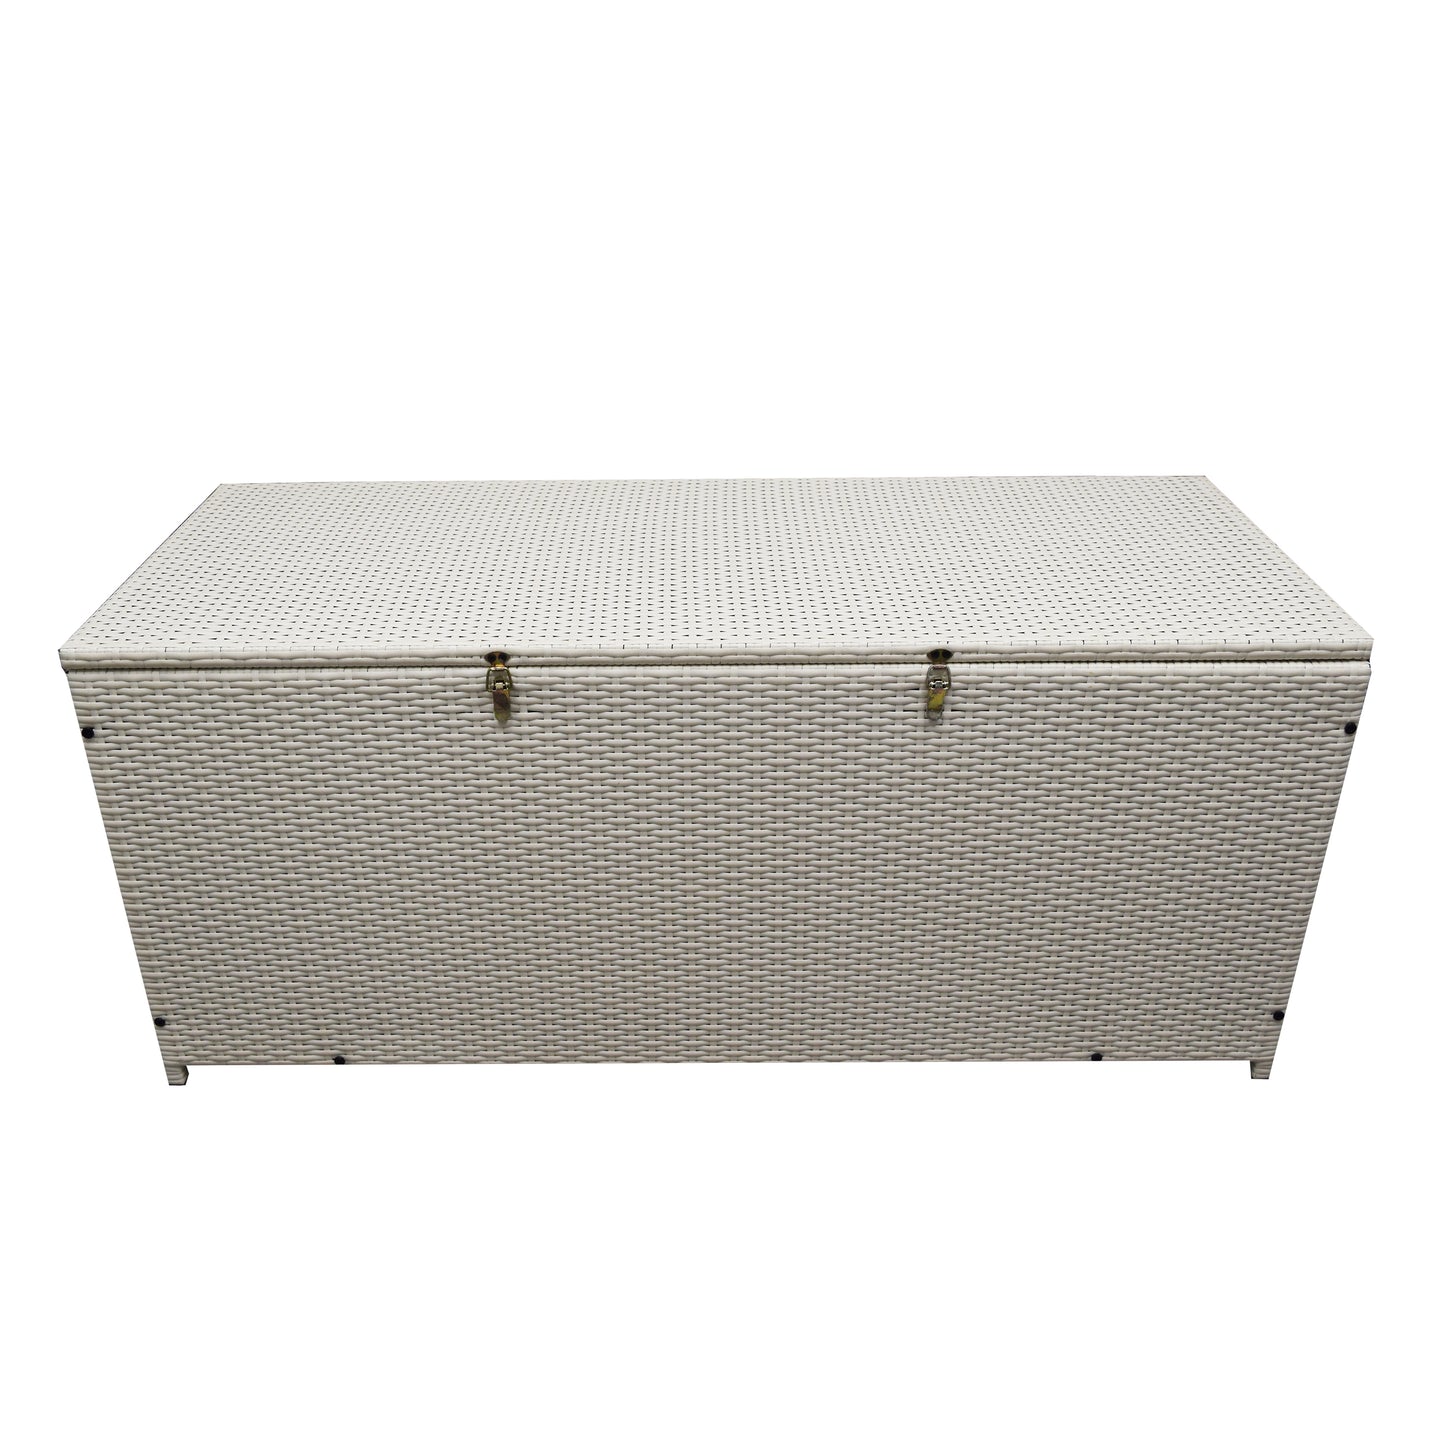 White Wicker Patio Deck Box with 113 Gallon Storage and Metal Frame